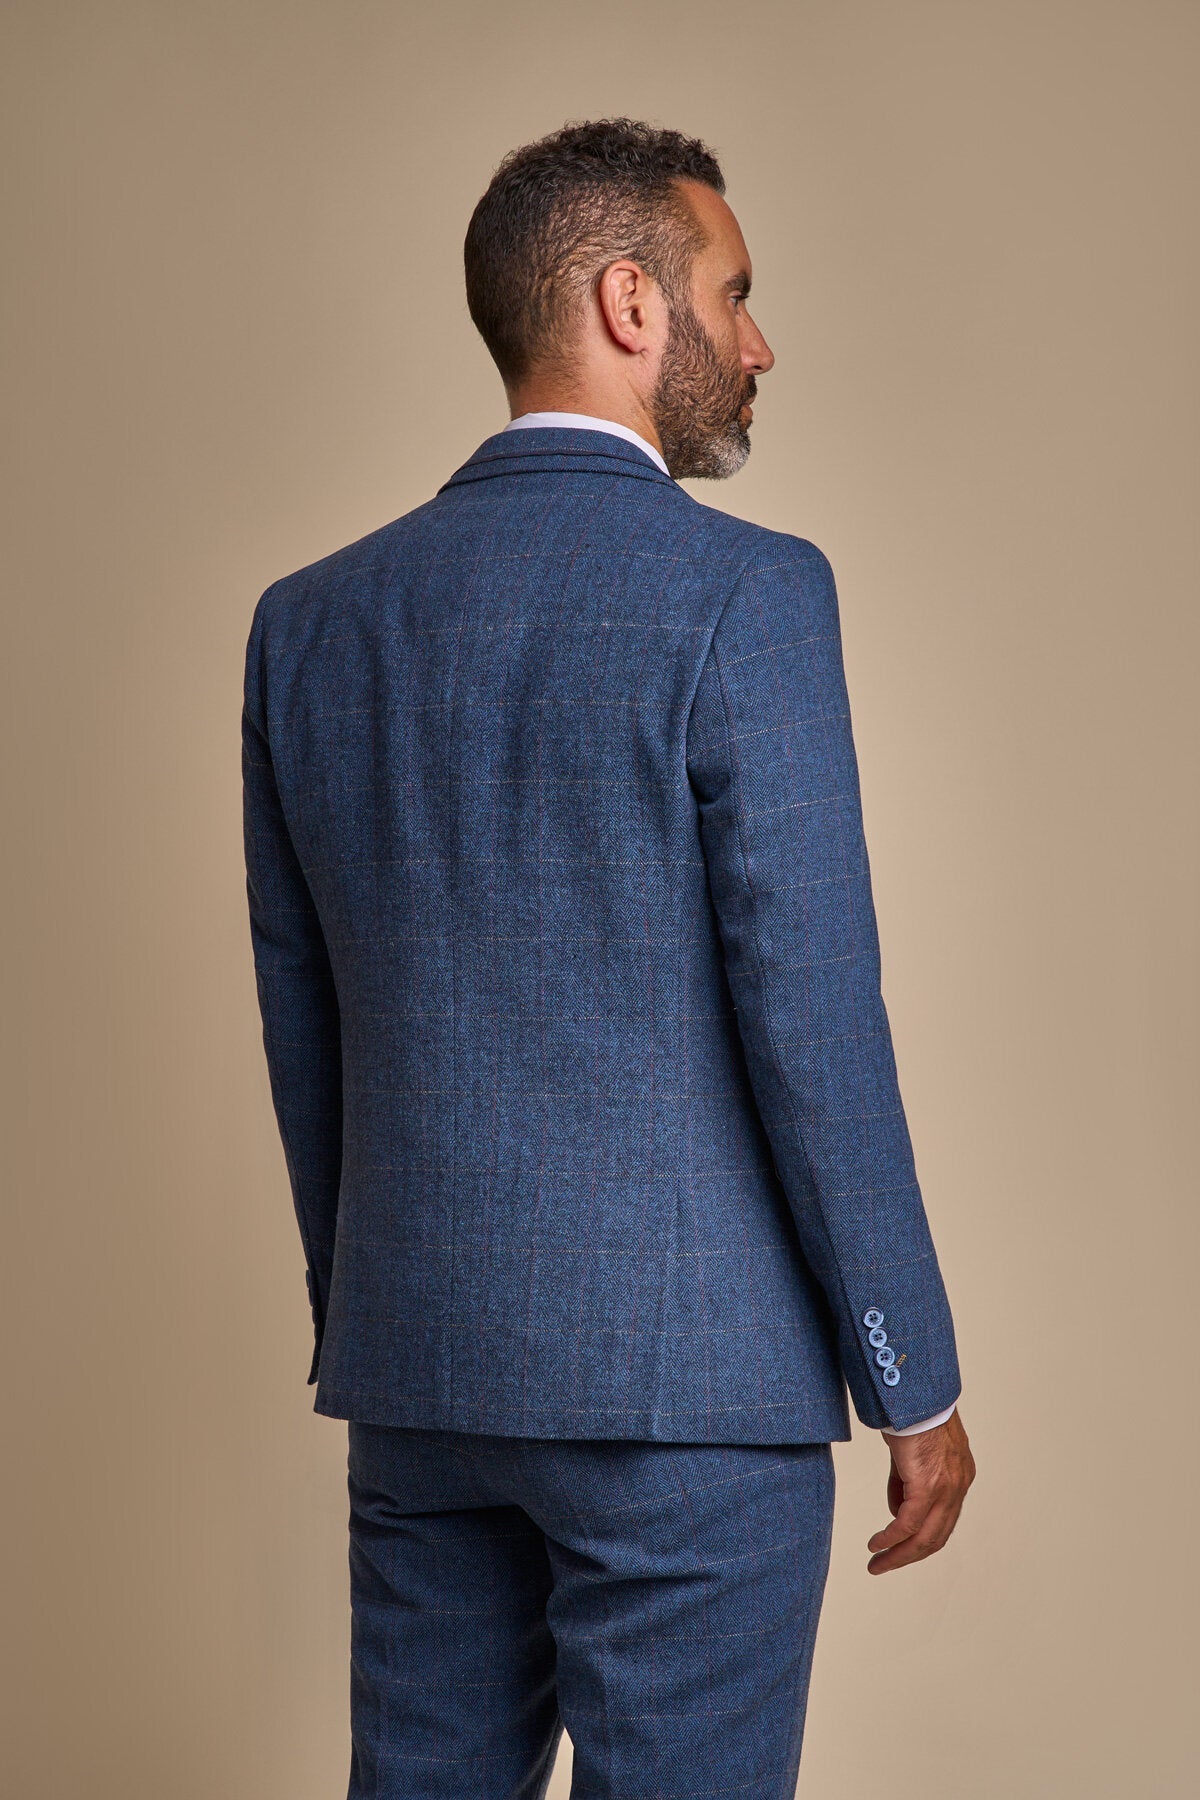 Carnegi Navy Tweed Suit Swatch - Swatch - - Swagger & Swoon